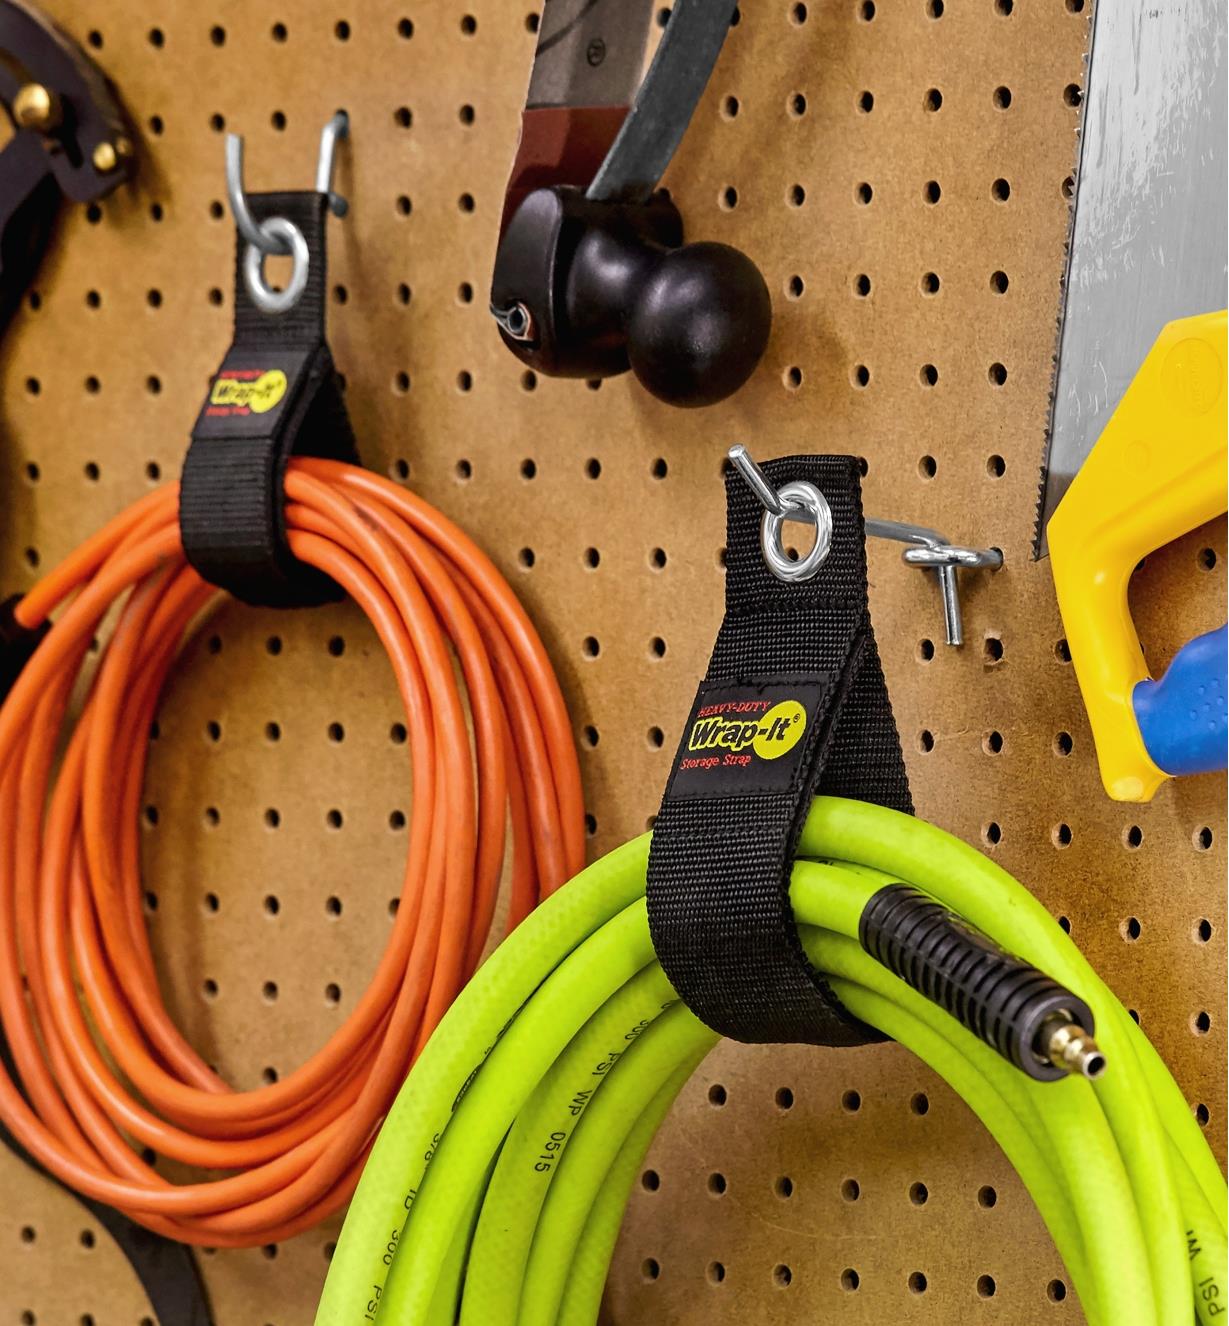 Heavy-duty storage wraps used to hang a pneumatic hose and an extension cord on a pegboard wall